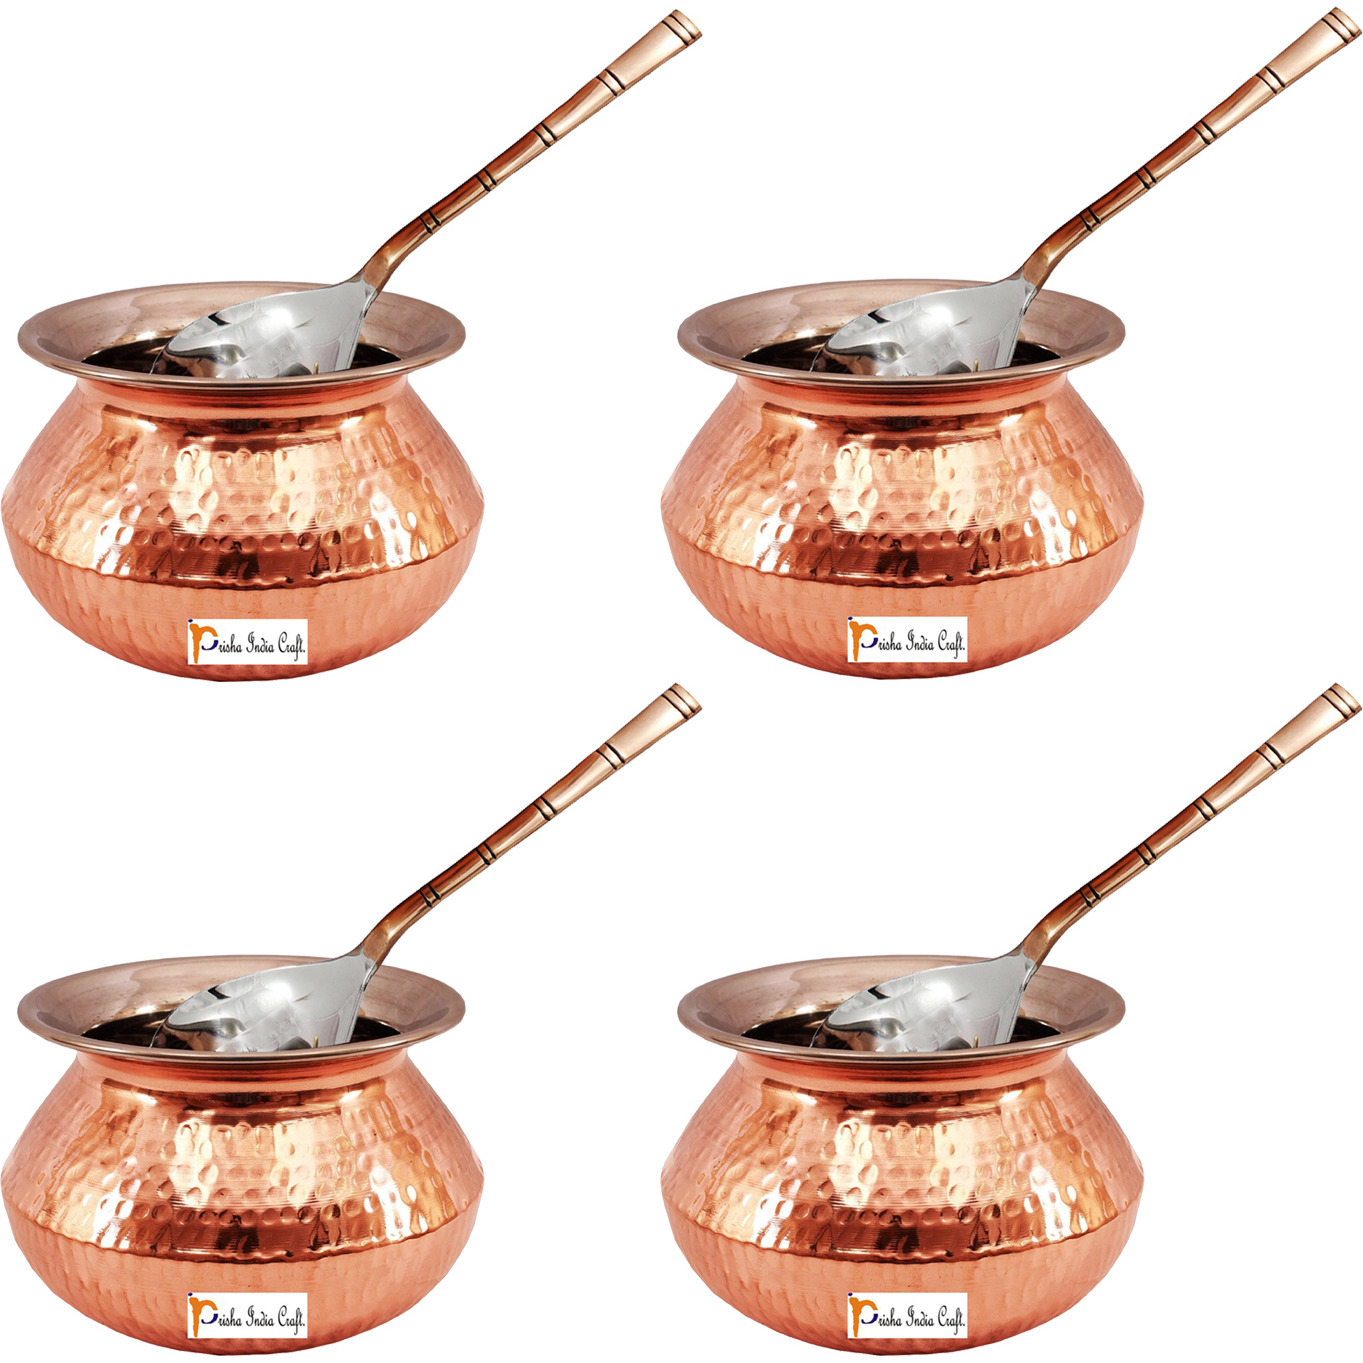 Set of 4 Prisha India Craft B. High Quality Handmade Steel Copper Casserole and Serving Spoon - Set of Copper Handi and Serving Spoon - Copper Bowl Dia - 6.5  X Height - 4.50  - Christmas Gift